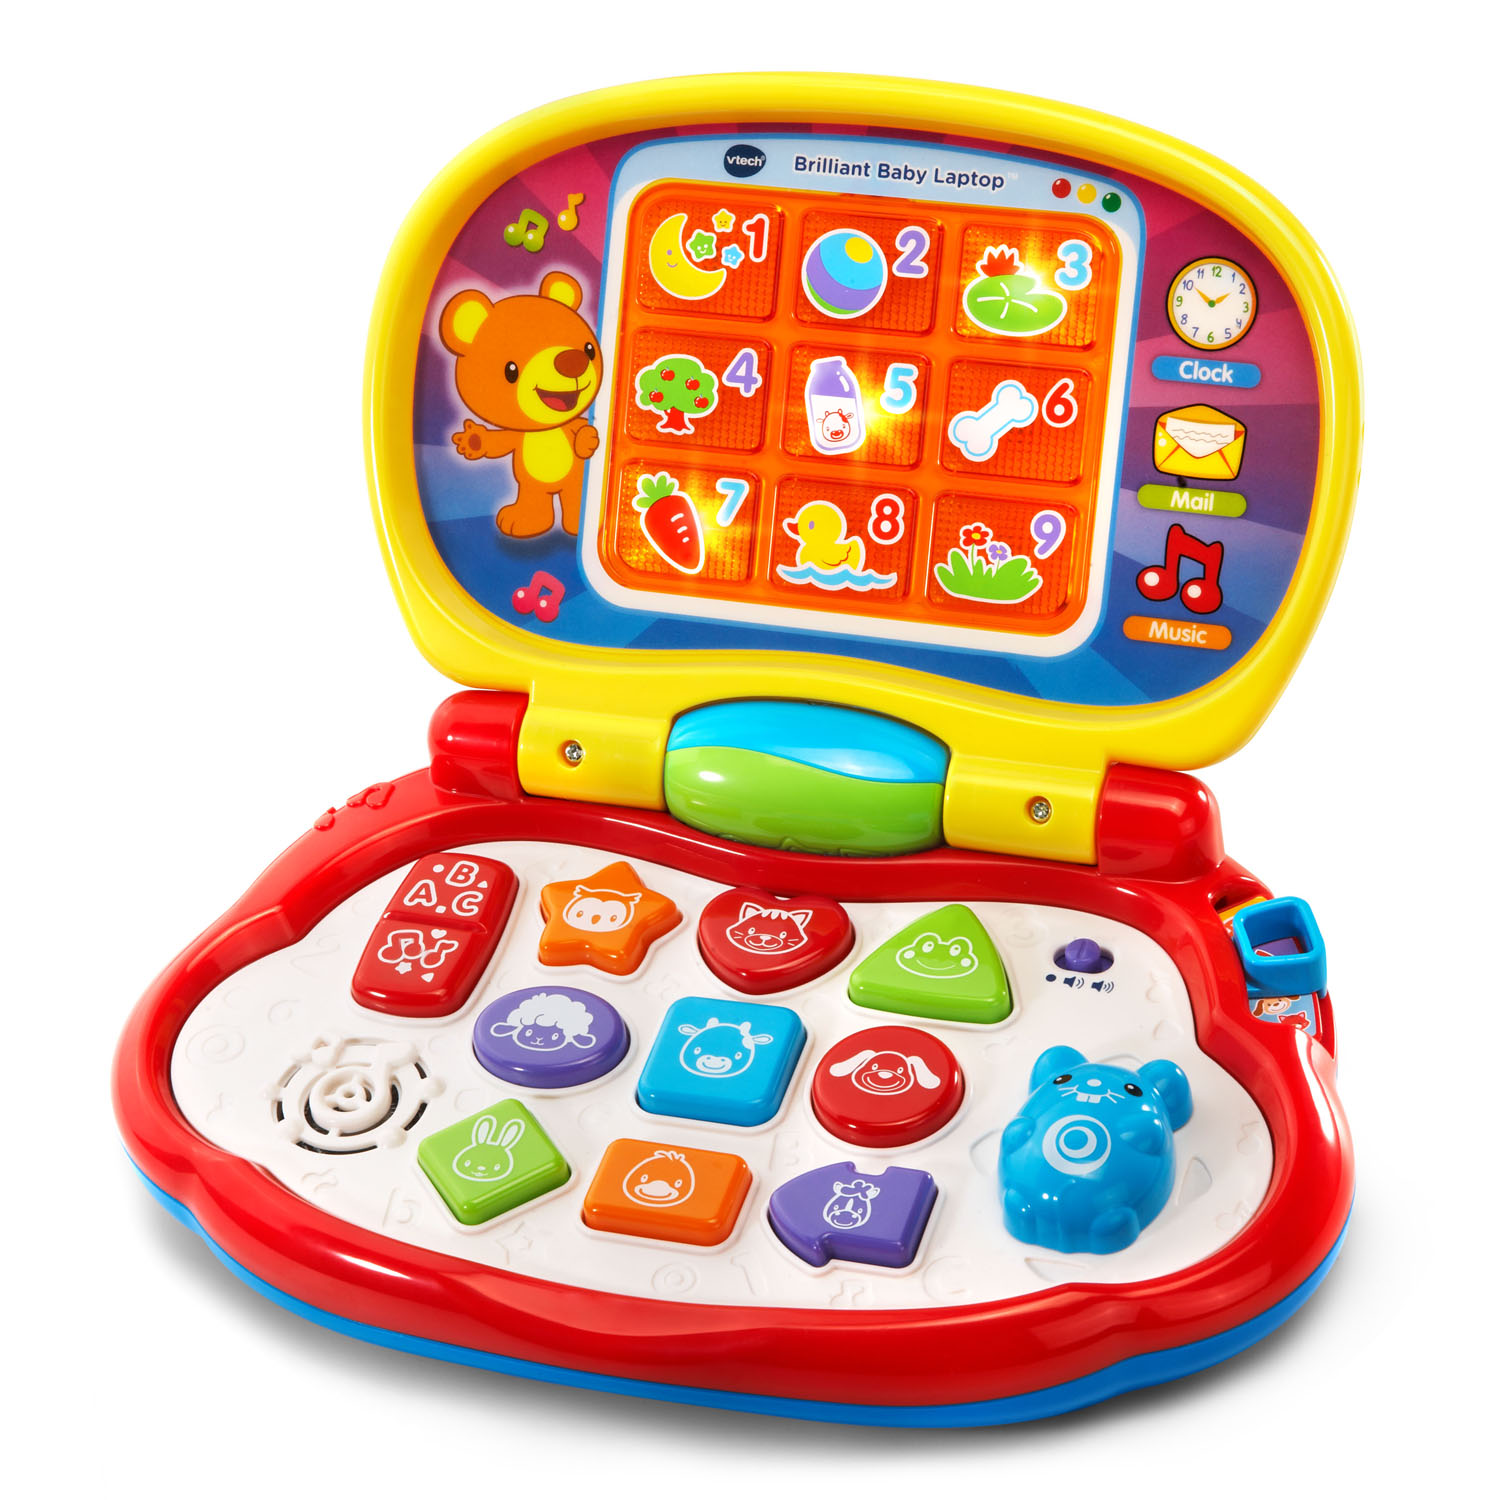 VTech Brilliant Baby Laptop Teaches Colors, Shapes, Animals and Music - image 1 of 7